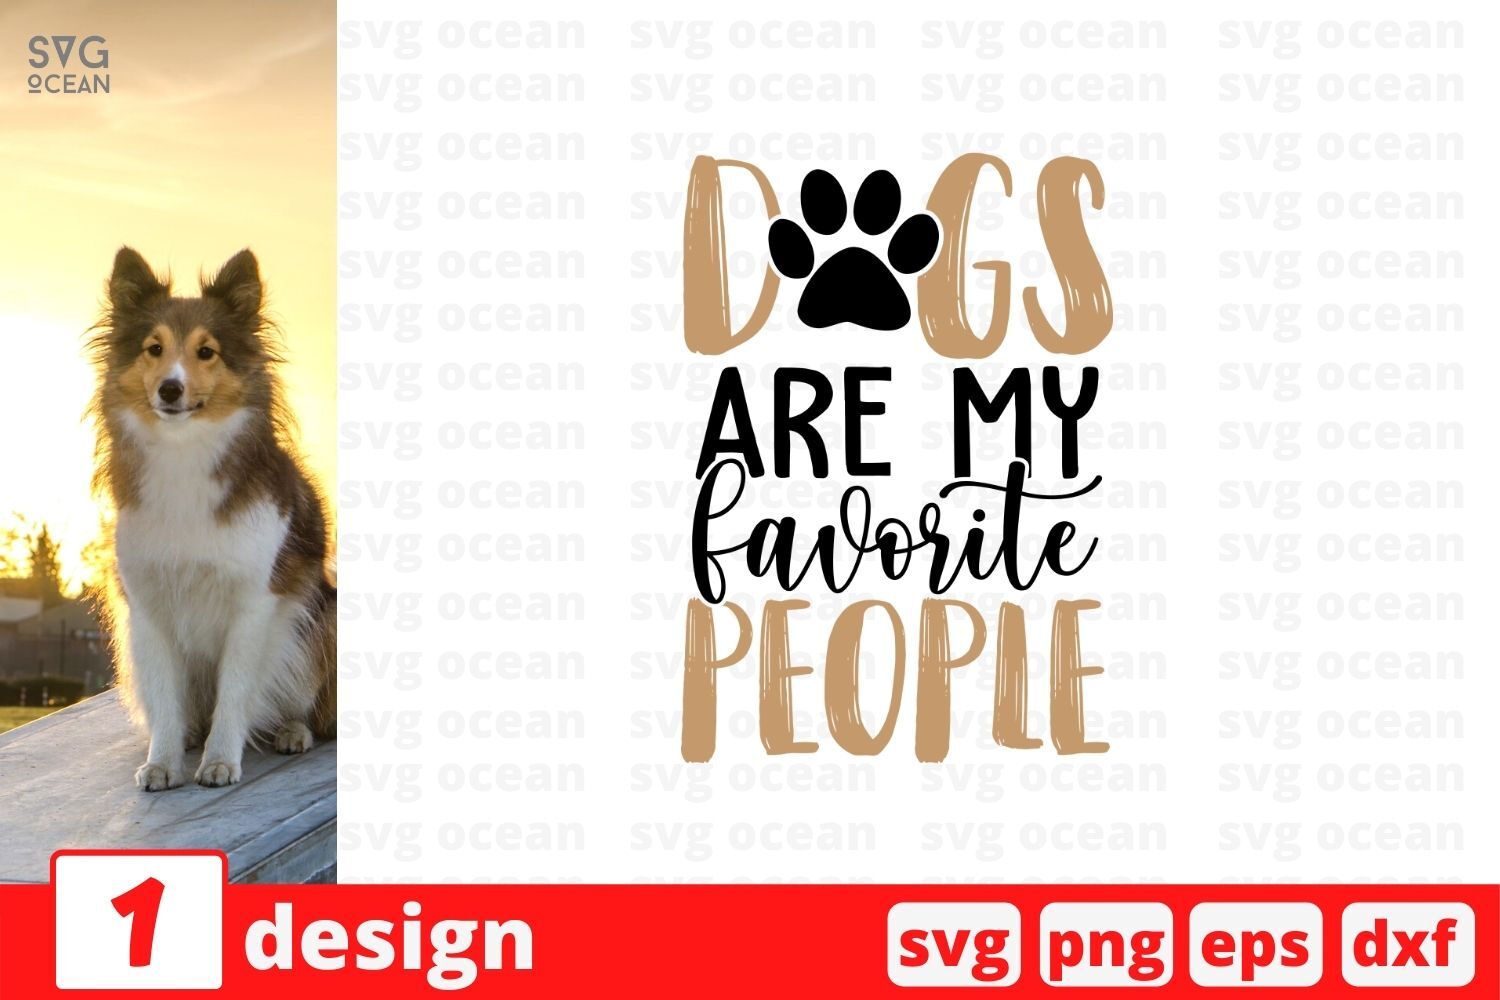 Dogs are my favorite people SVG Cut File By SvgOcean | TheHungryJPEG